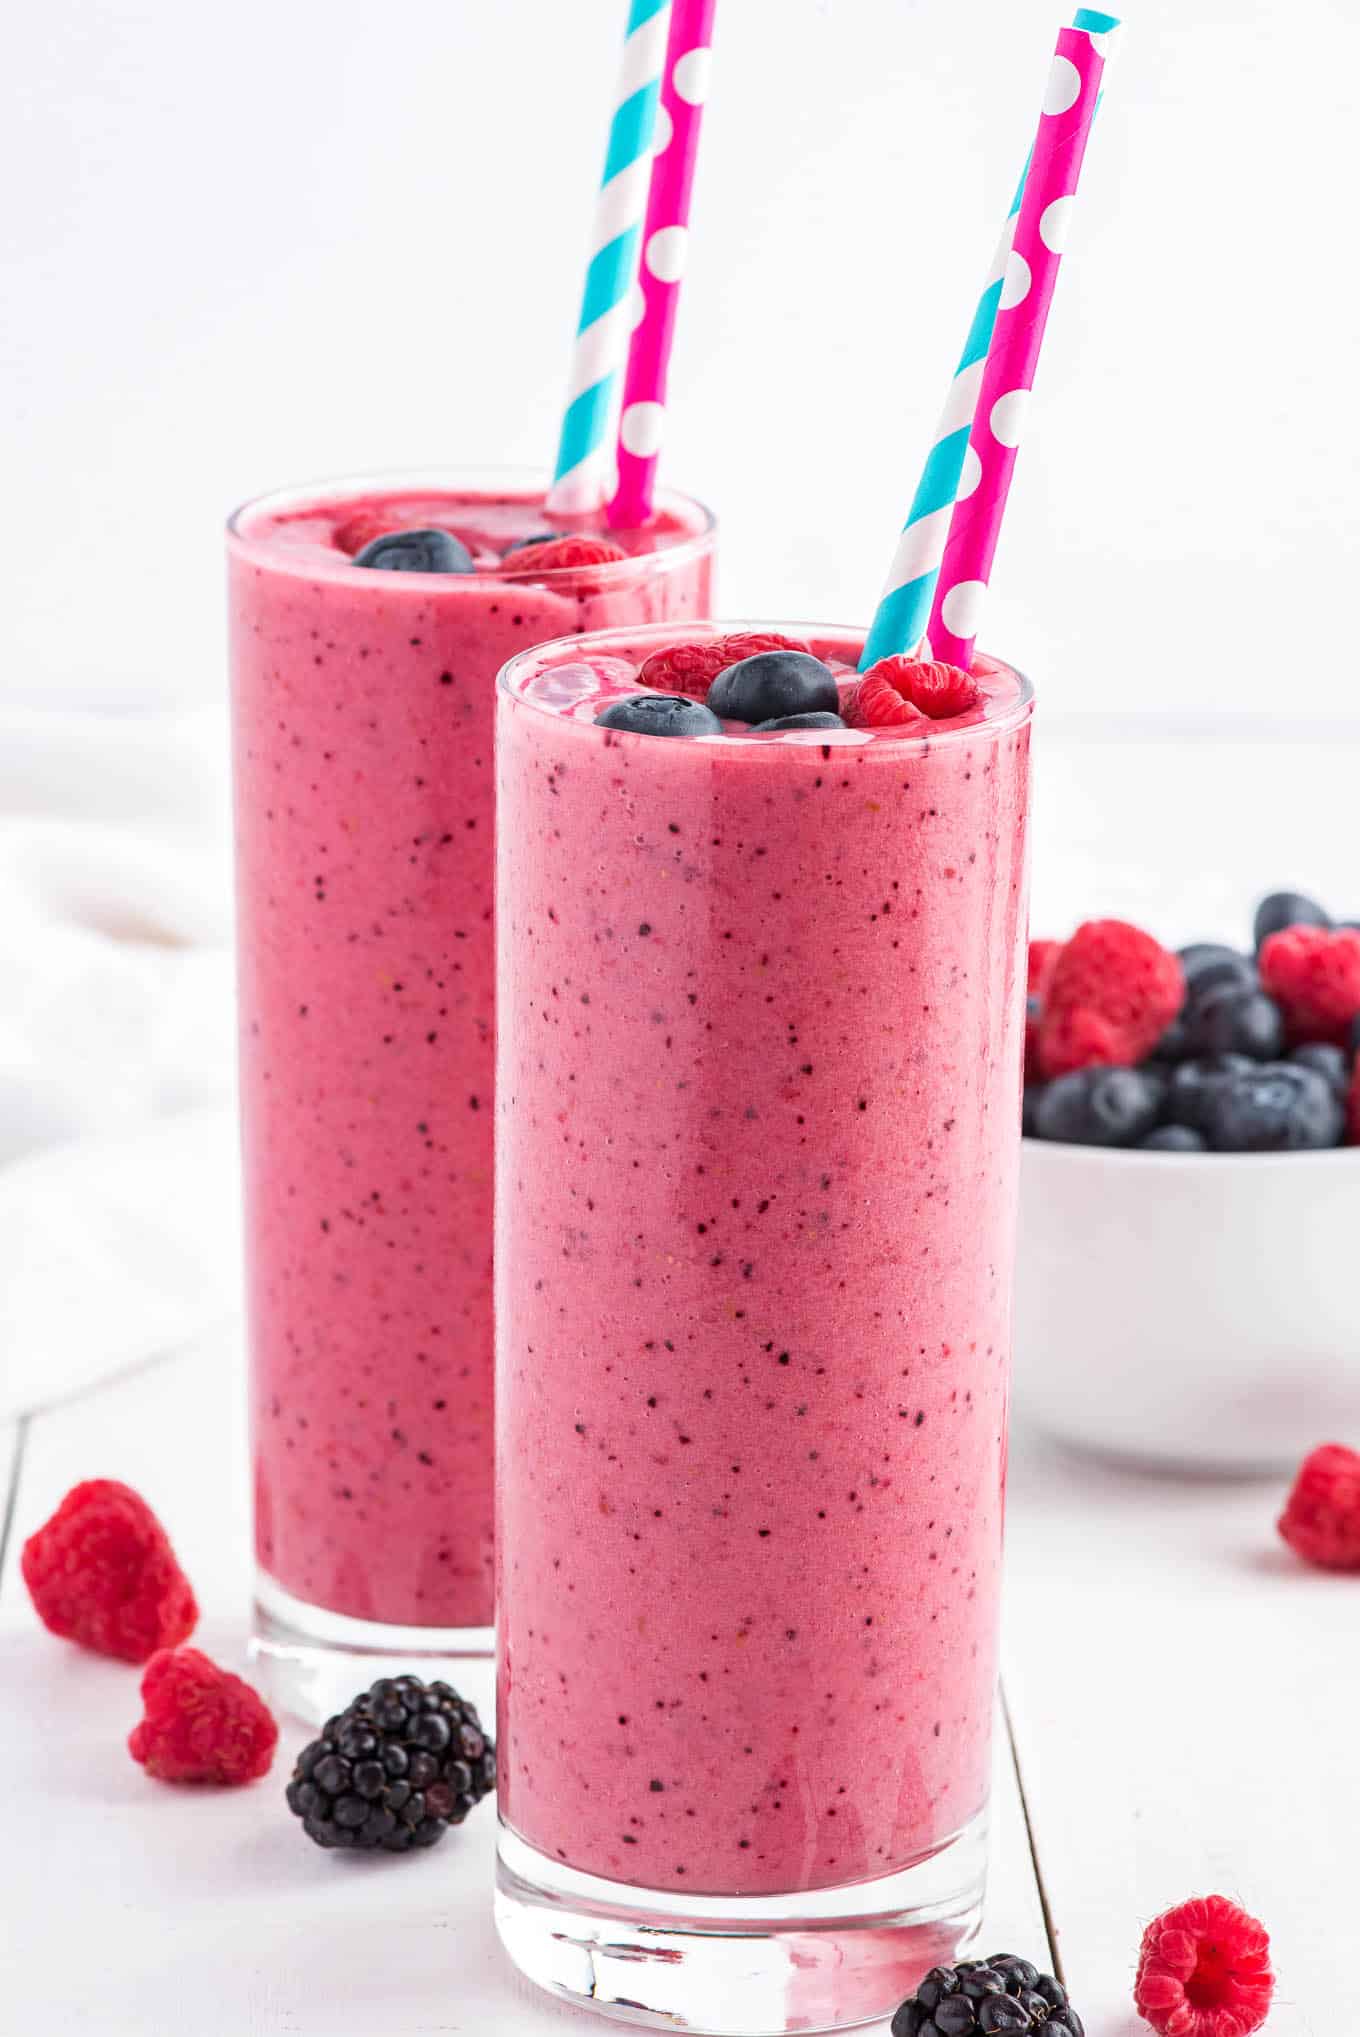 Two glasses of morning smoothies on the table with fresh berries and straws.